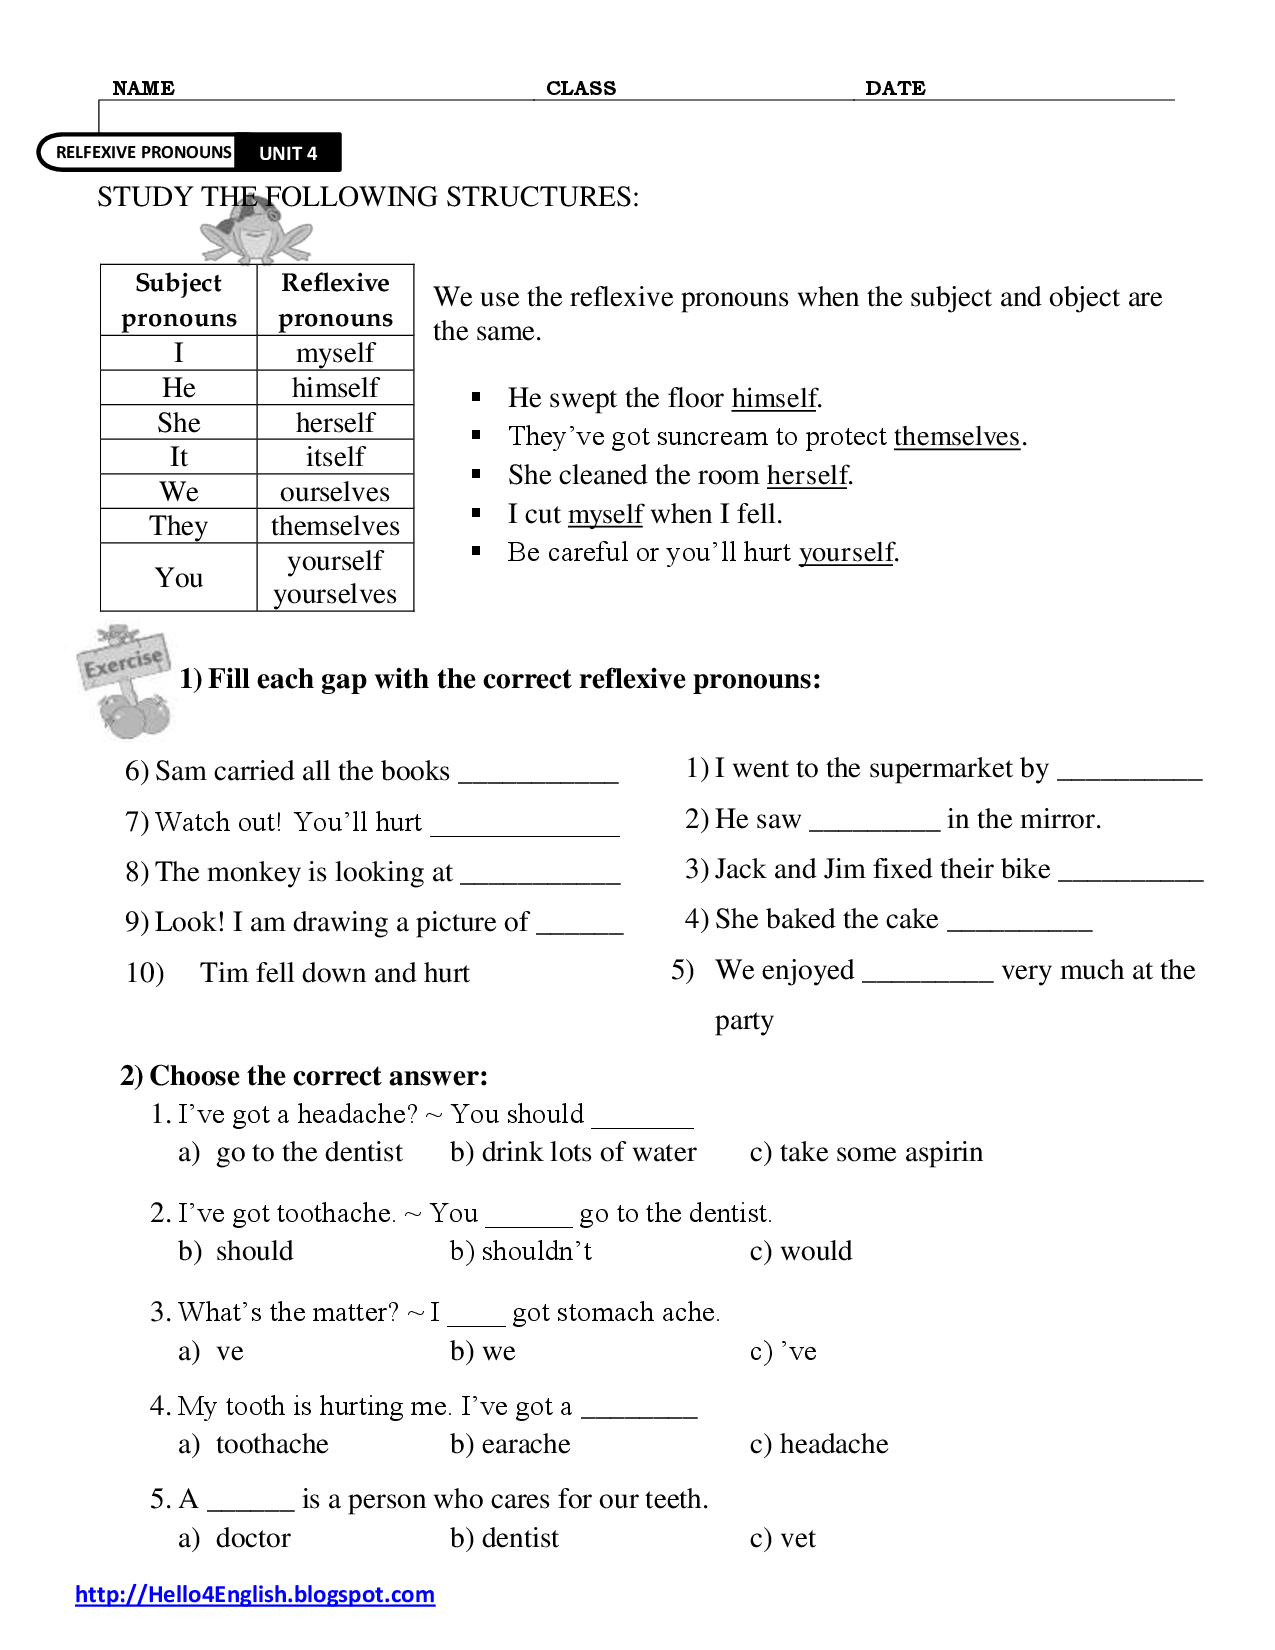 Reflexive and Intensive Pronouns Worksheet Image